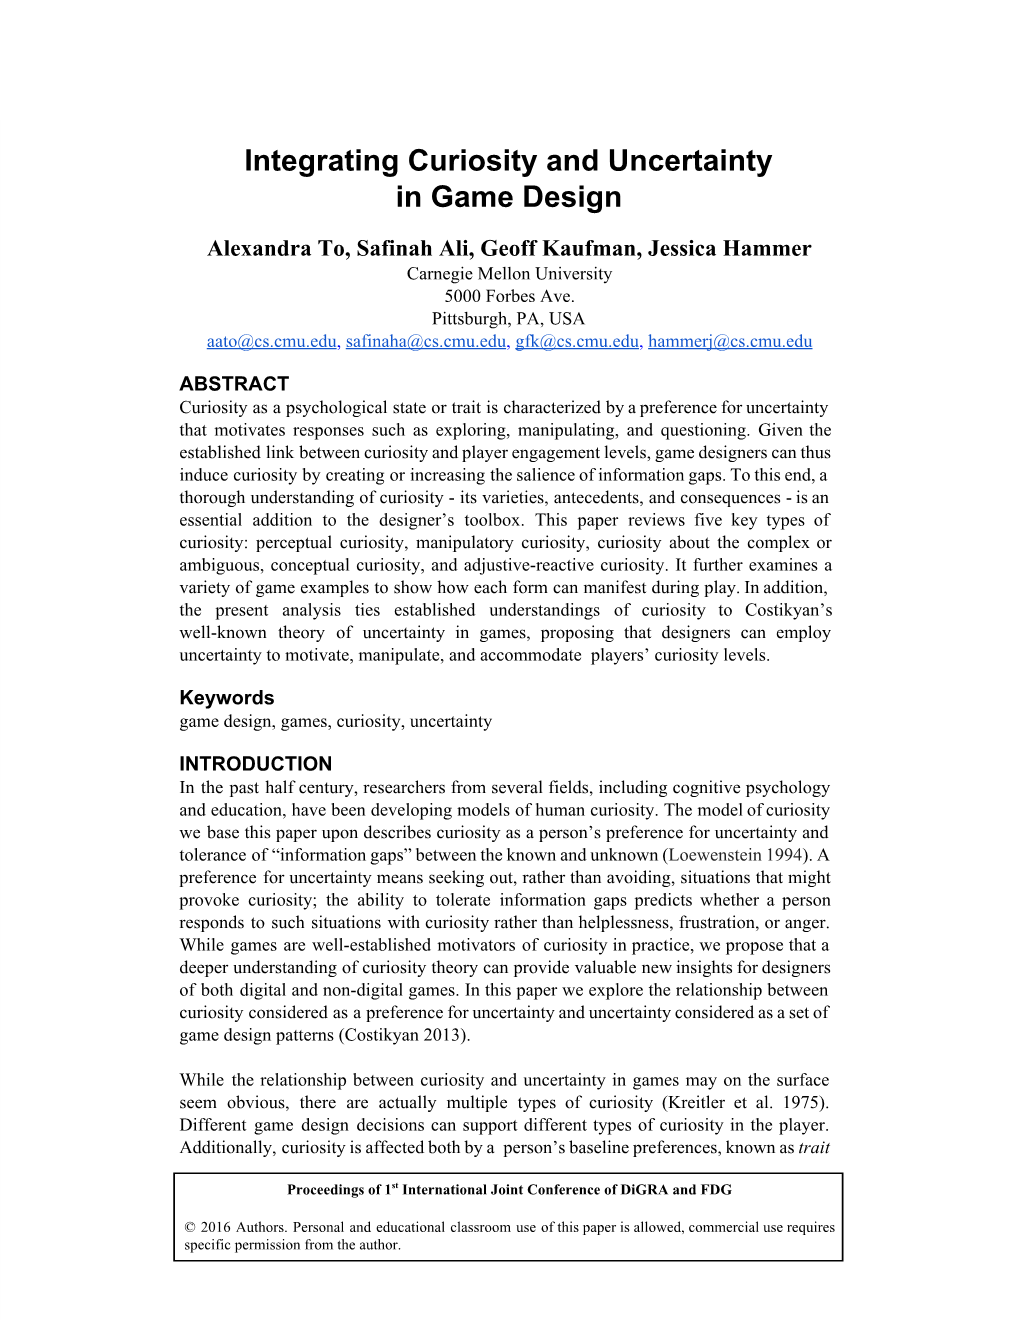 Integrating Curiosity and Uncertainty in Game Design